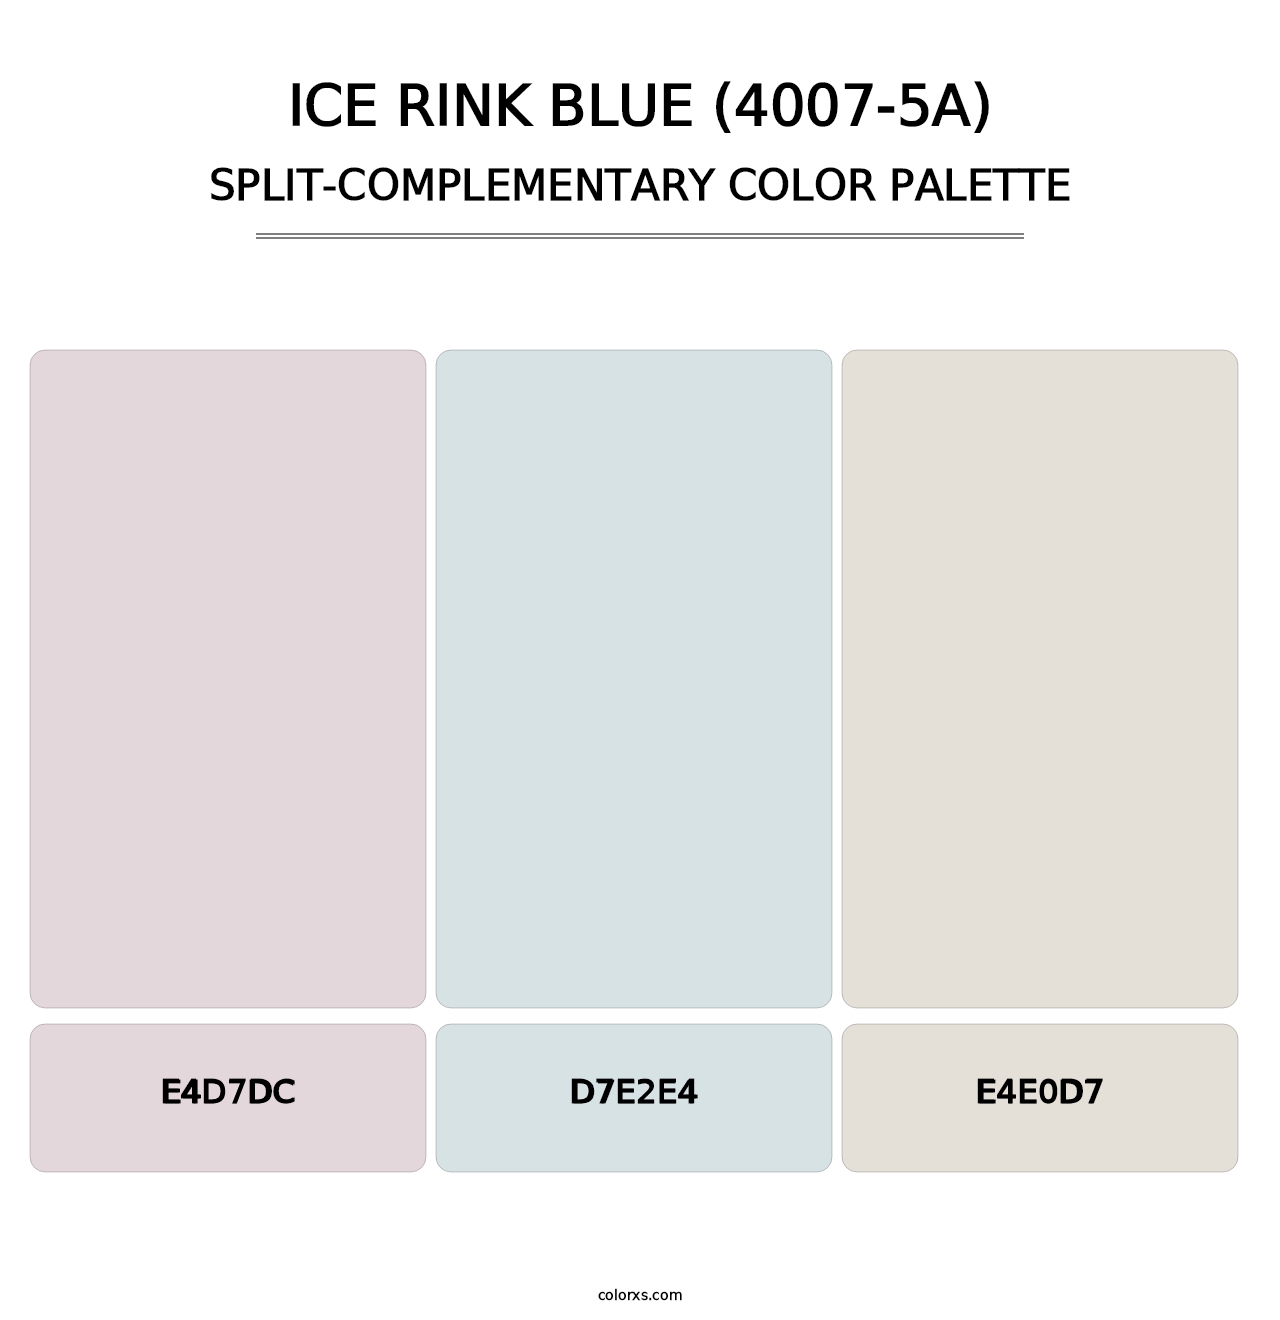 Ice Rink Blue (4007-5A) - Split-Complementary Color Palette